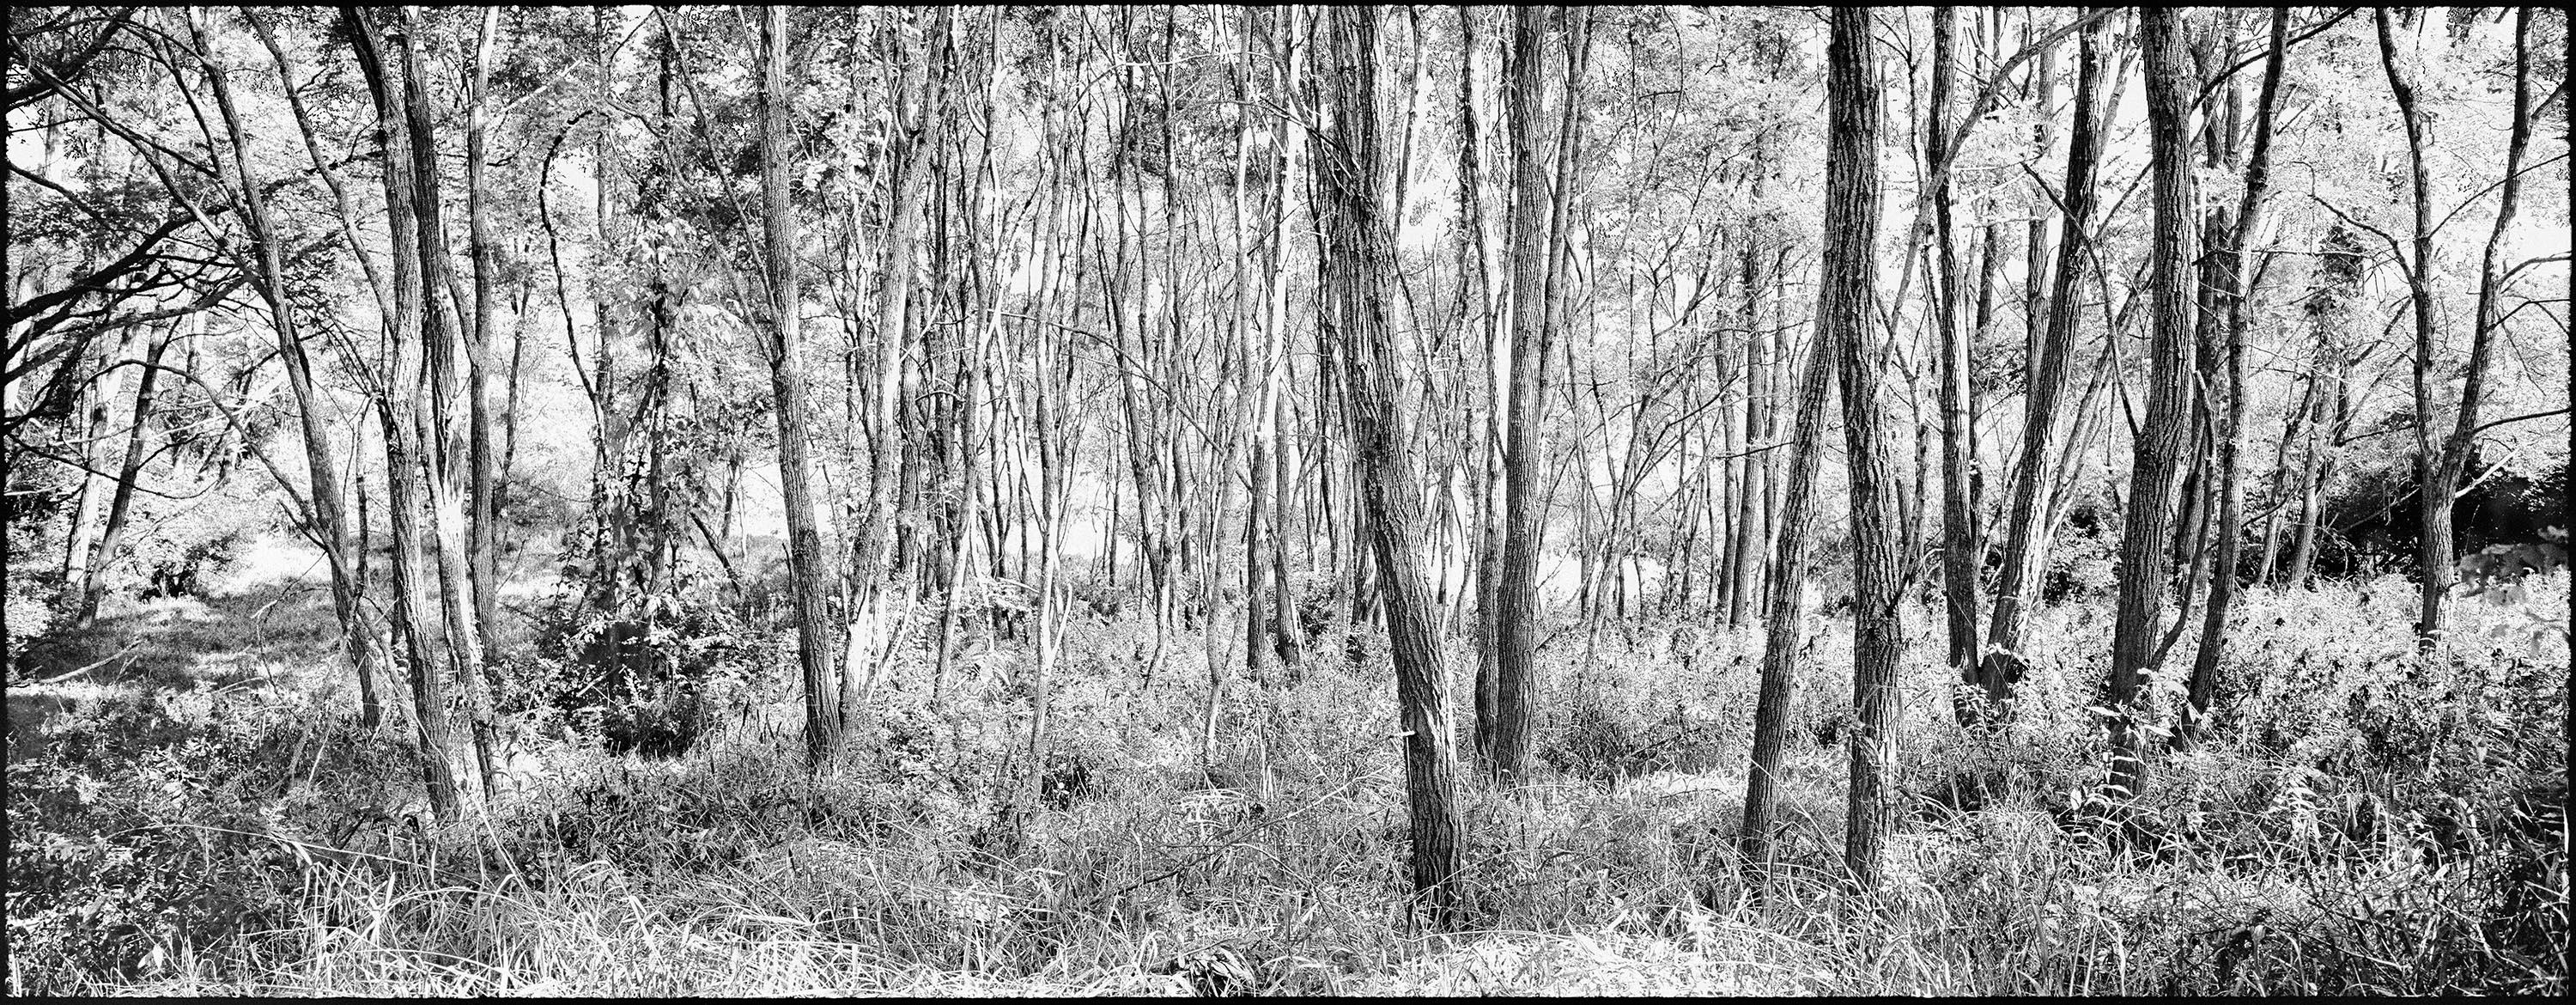 Nigel Parry Landscape Photograph - Woodland - panoramic black and white image with trees, fine art photography 2021